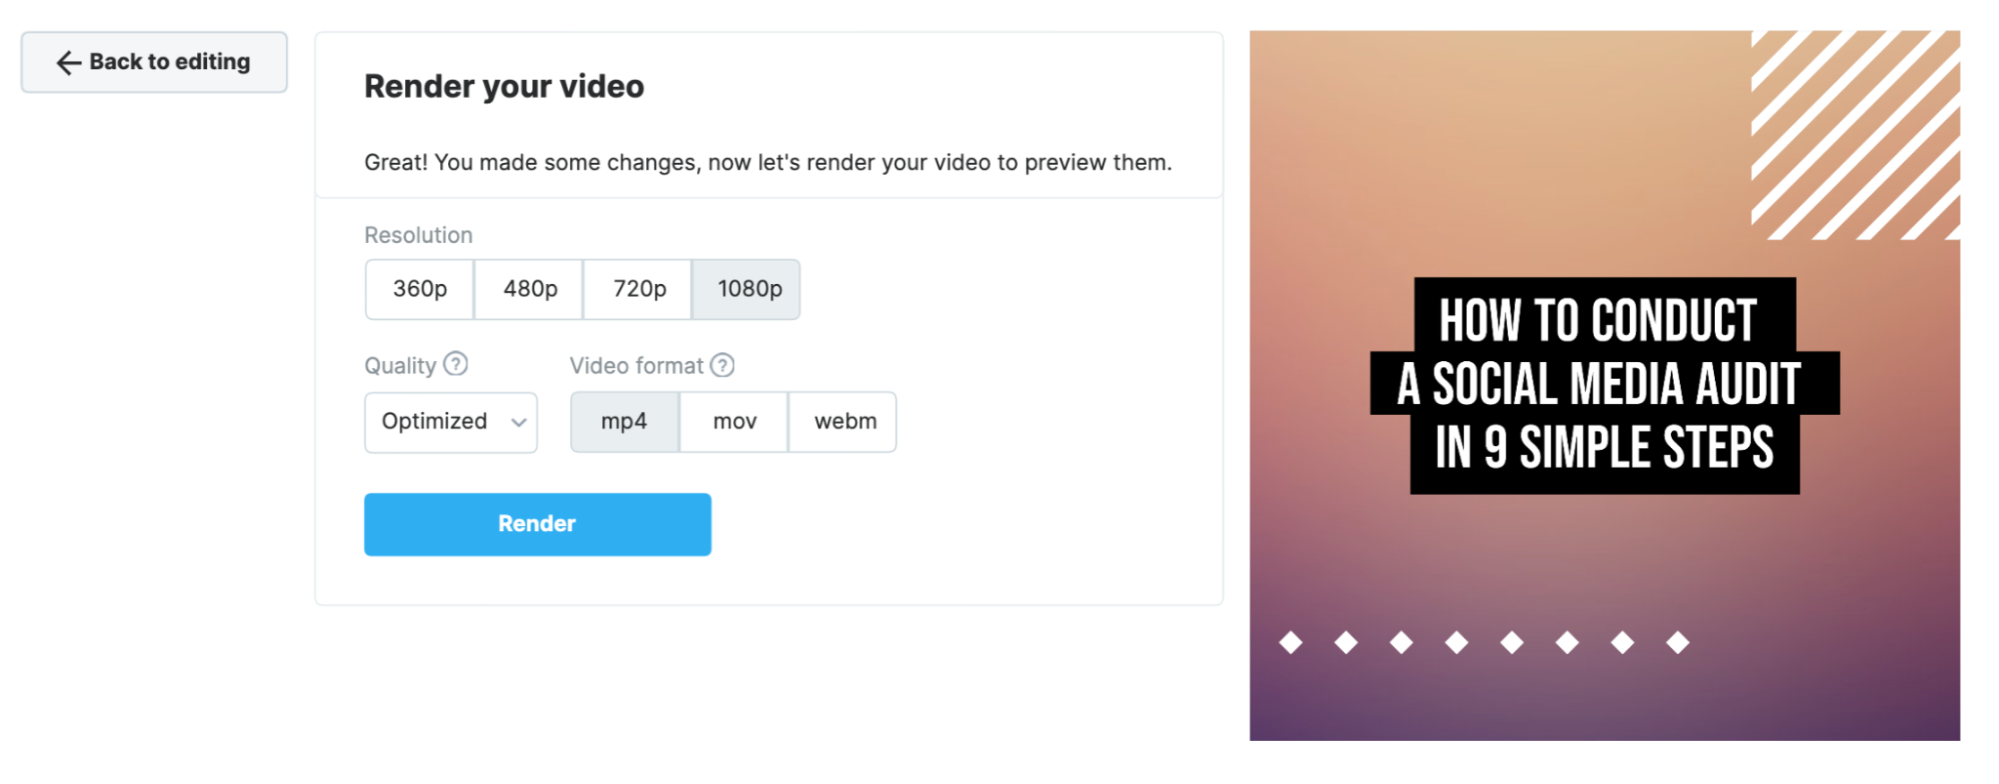 The publishing screen requires you to choose a resolution, quality, and video format.